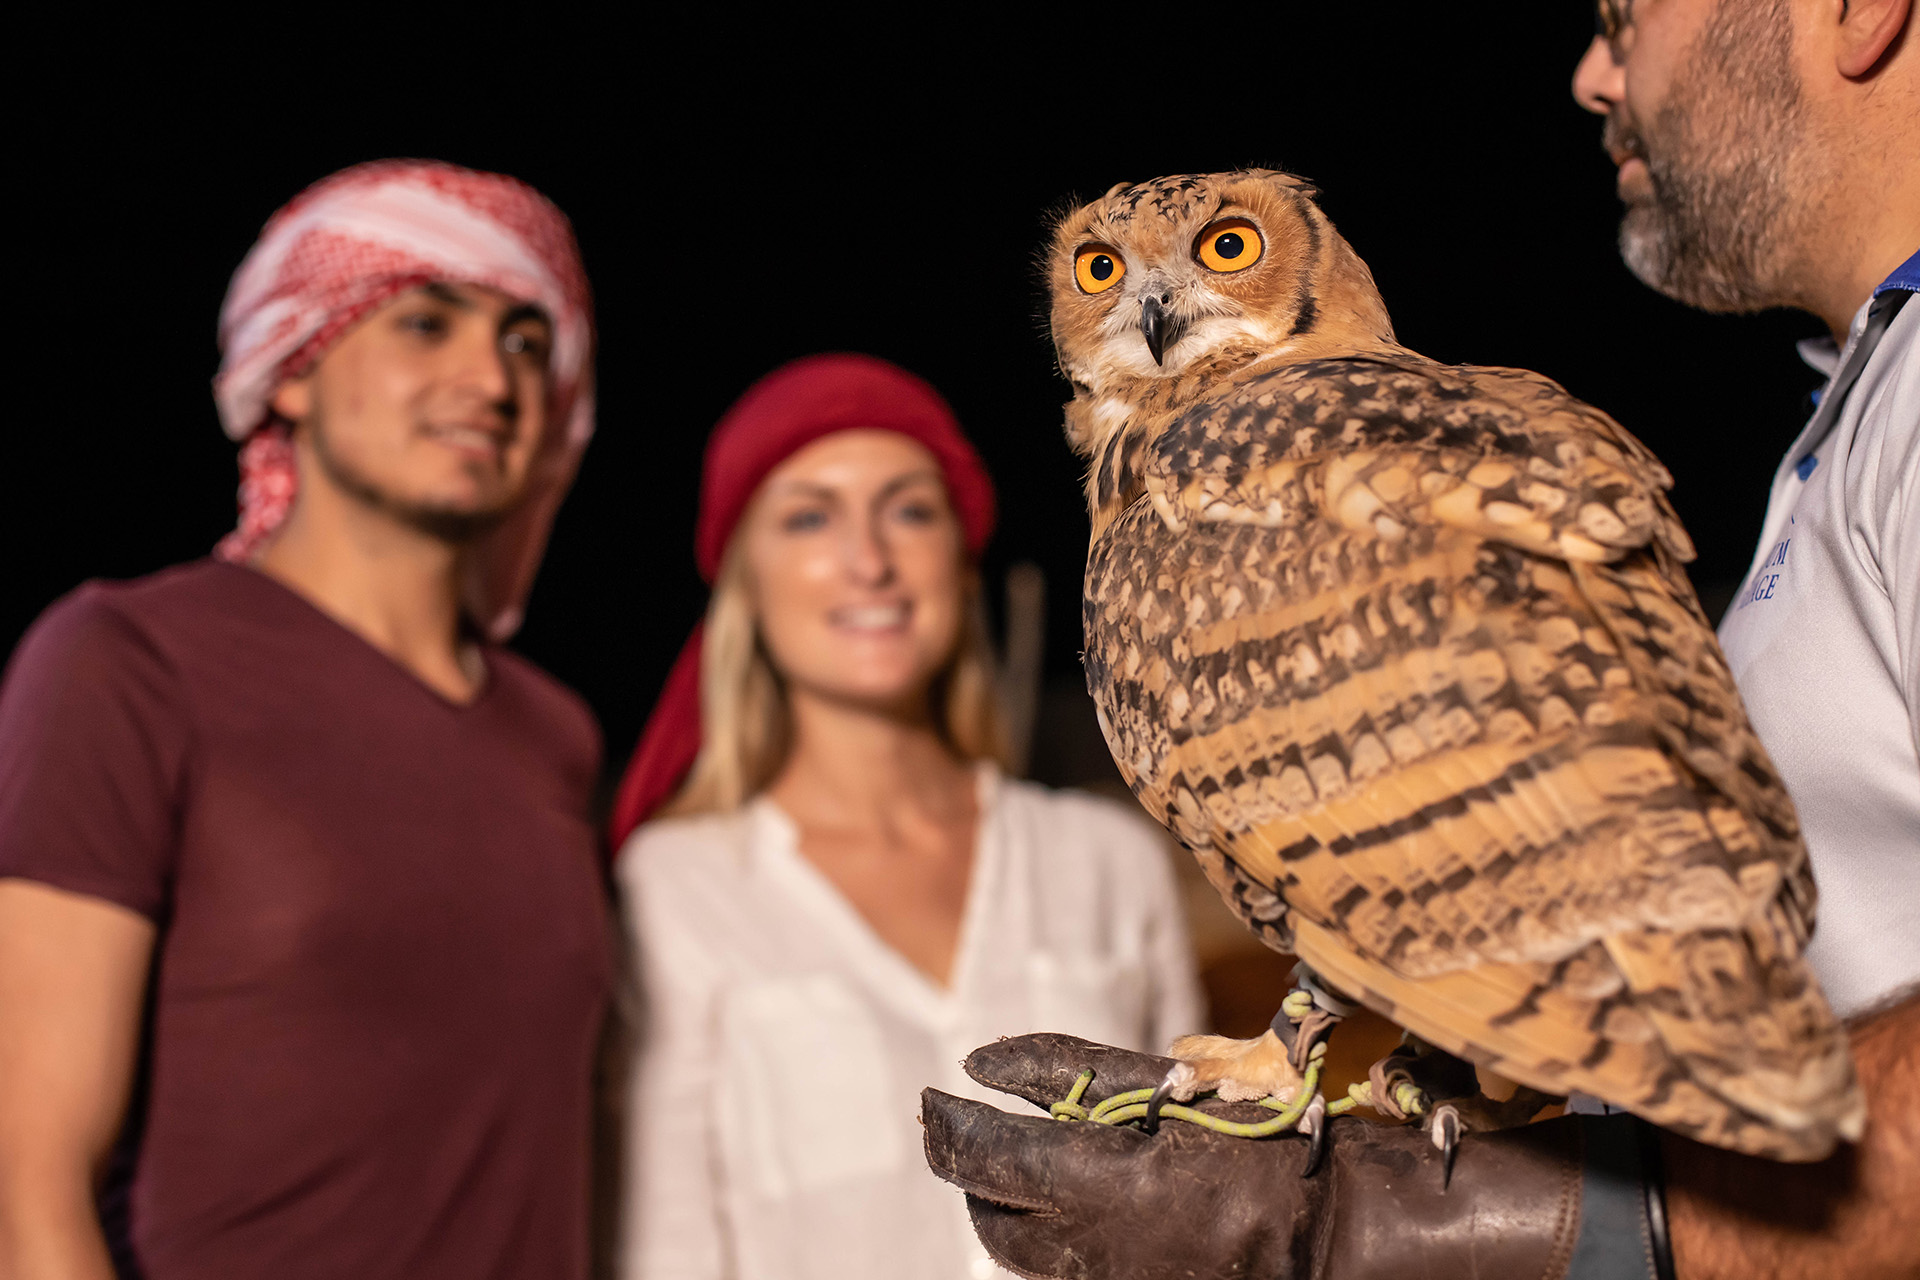 Owl encounter and photo opportunities